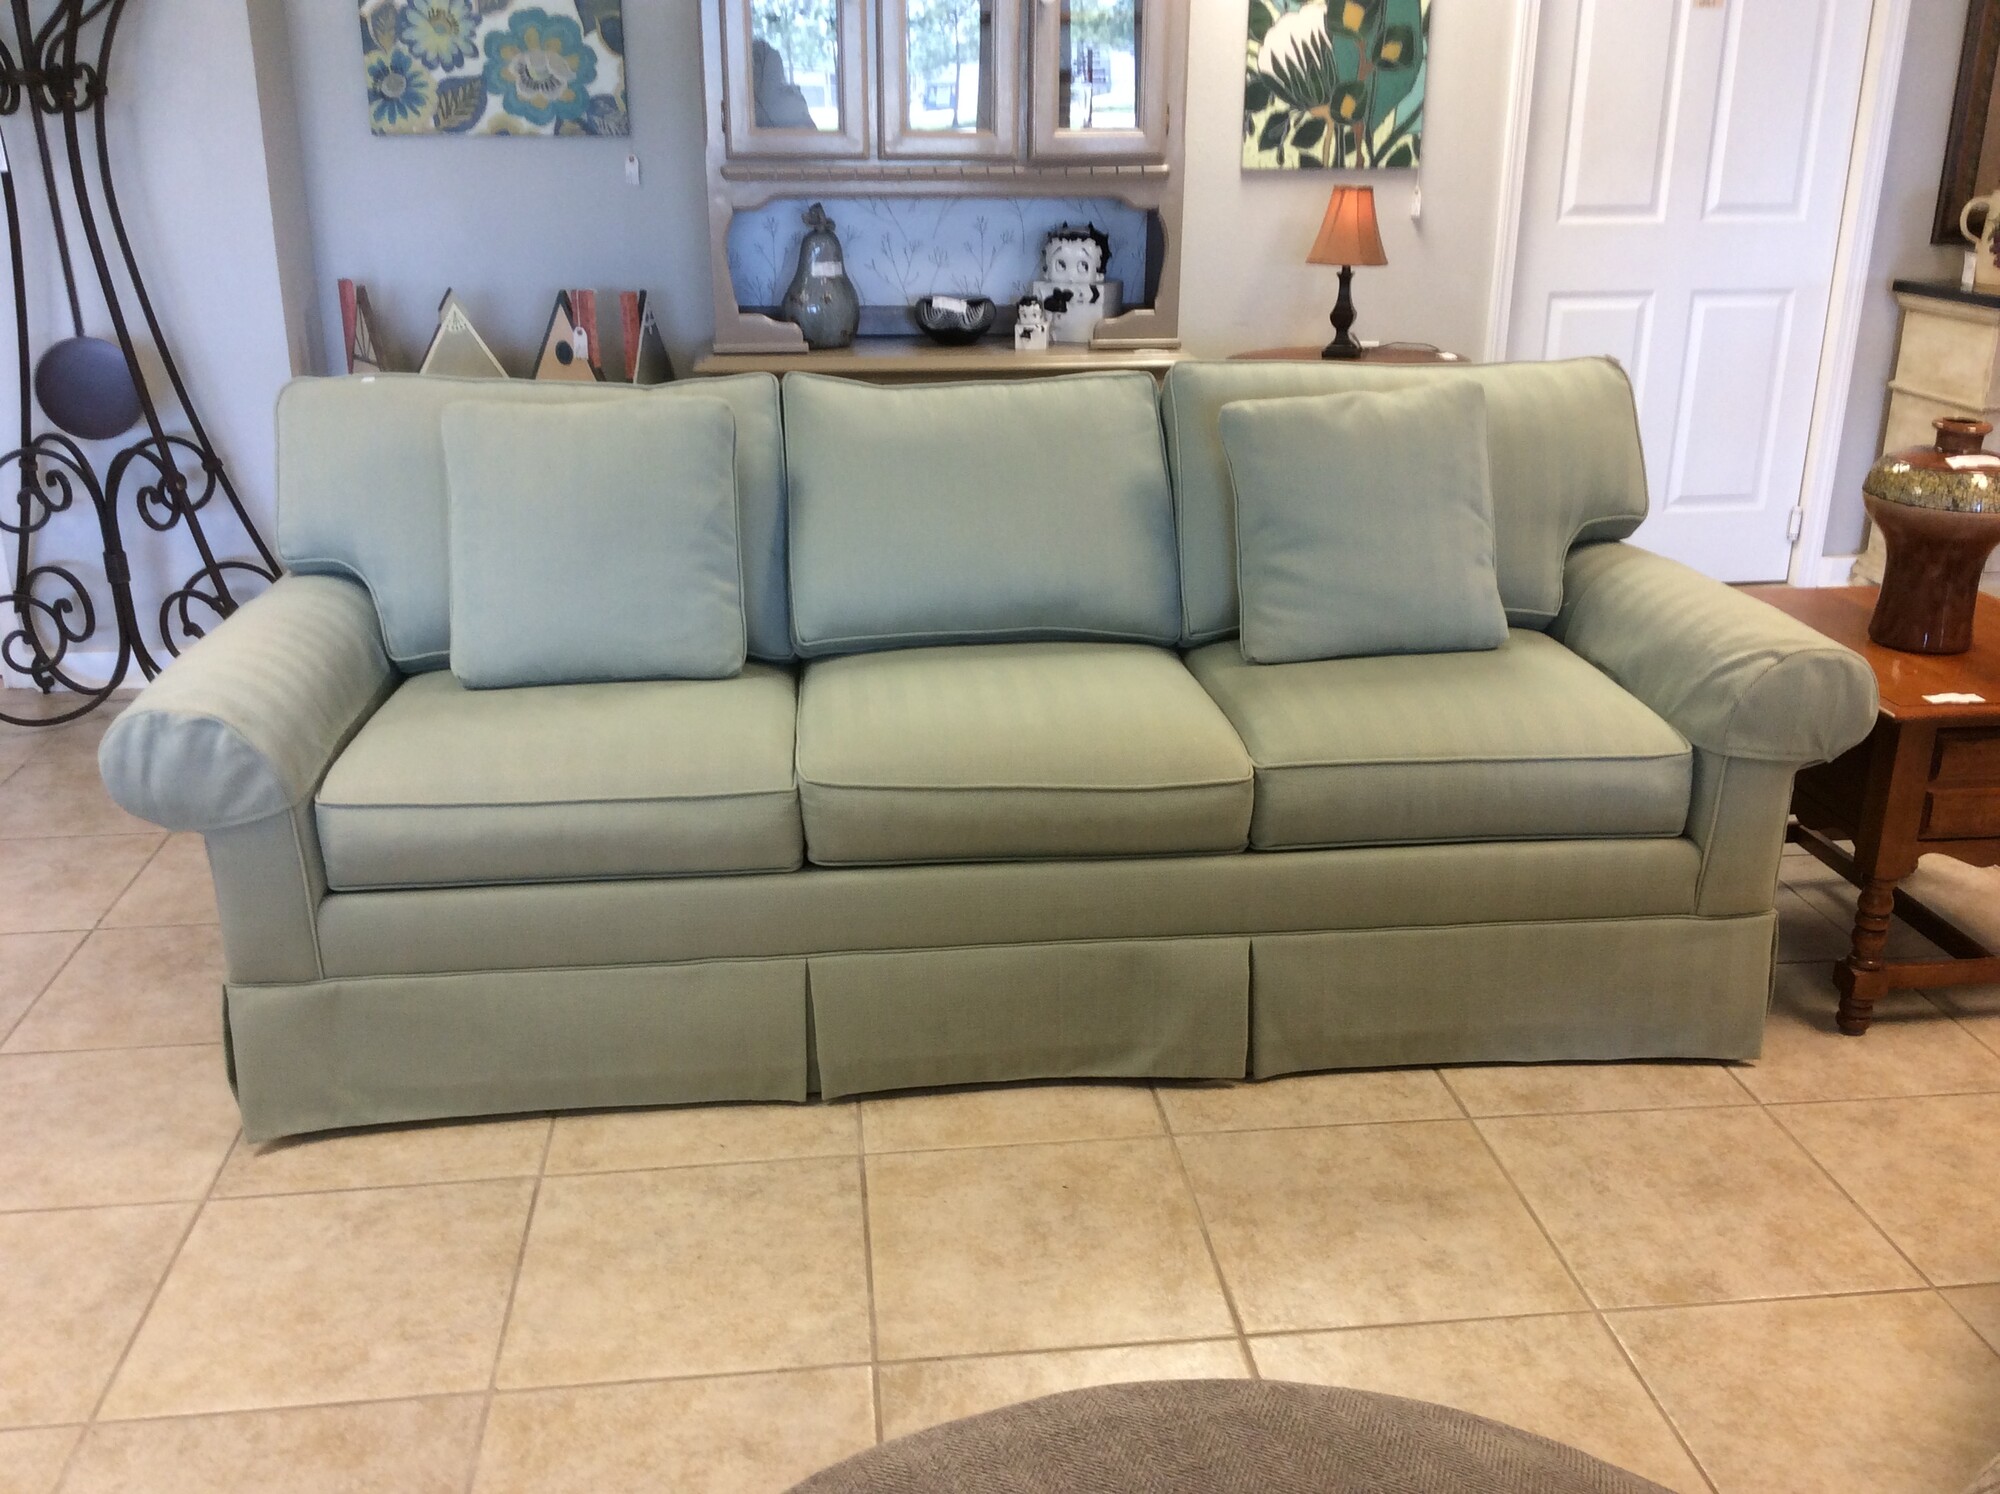 Ethan Allen Mint Green Sofa. This sofa is a 3 seater with 6 removable cushions. It also includes 2 pillows, a skirt and arm covers.